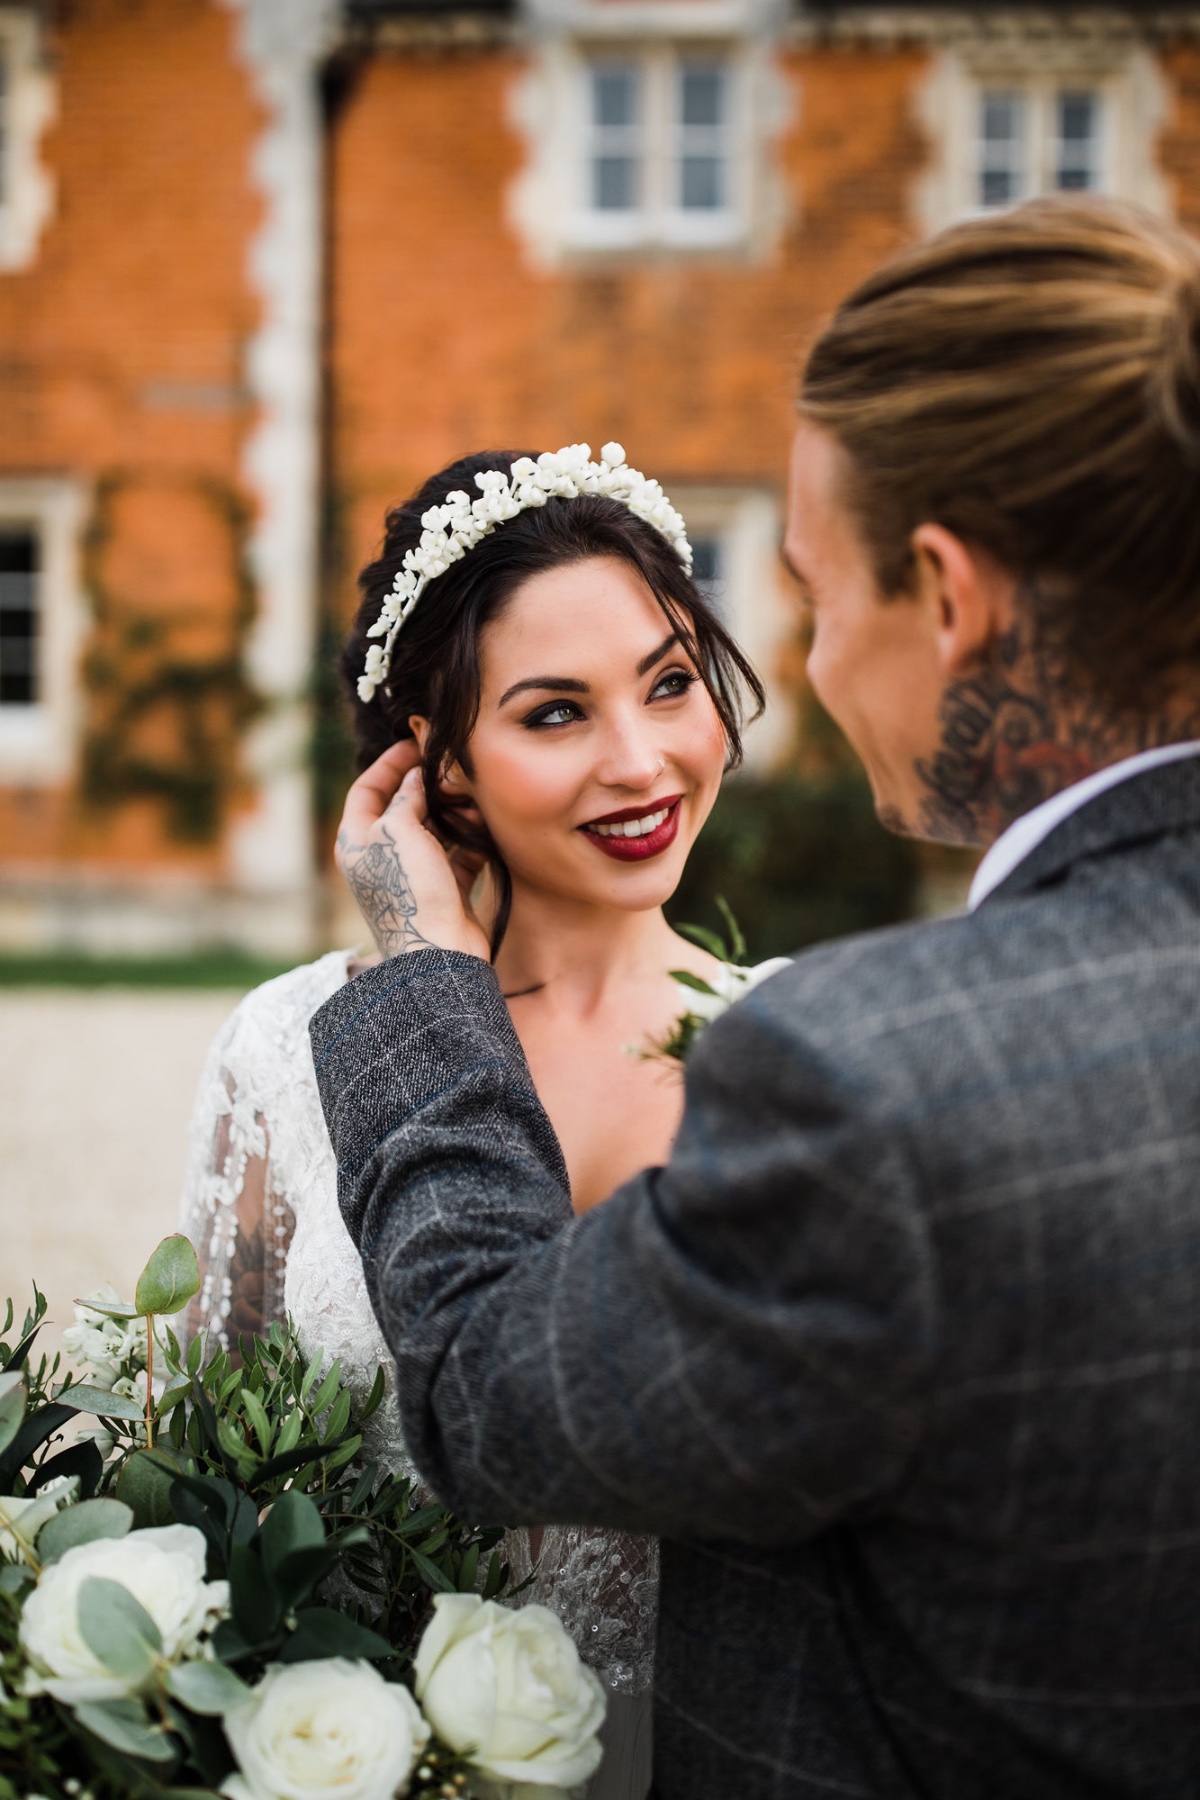 Alt Culture Meets Classic In This Unique Styled Shoot